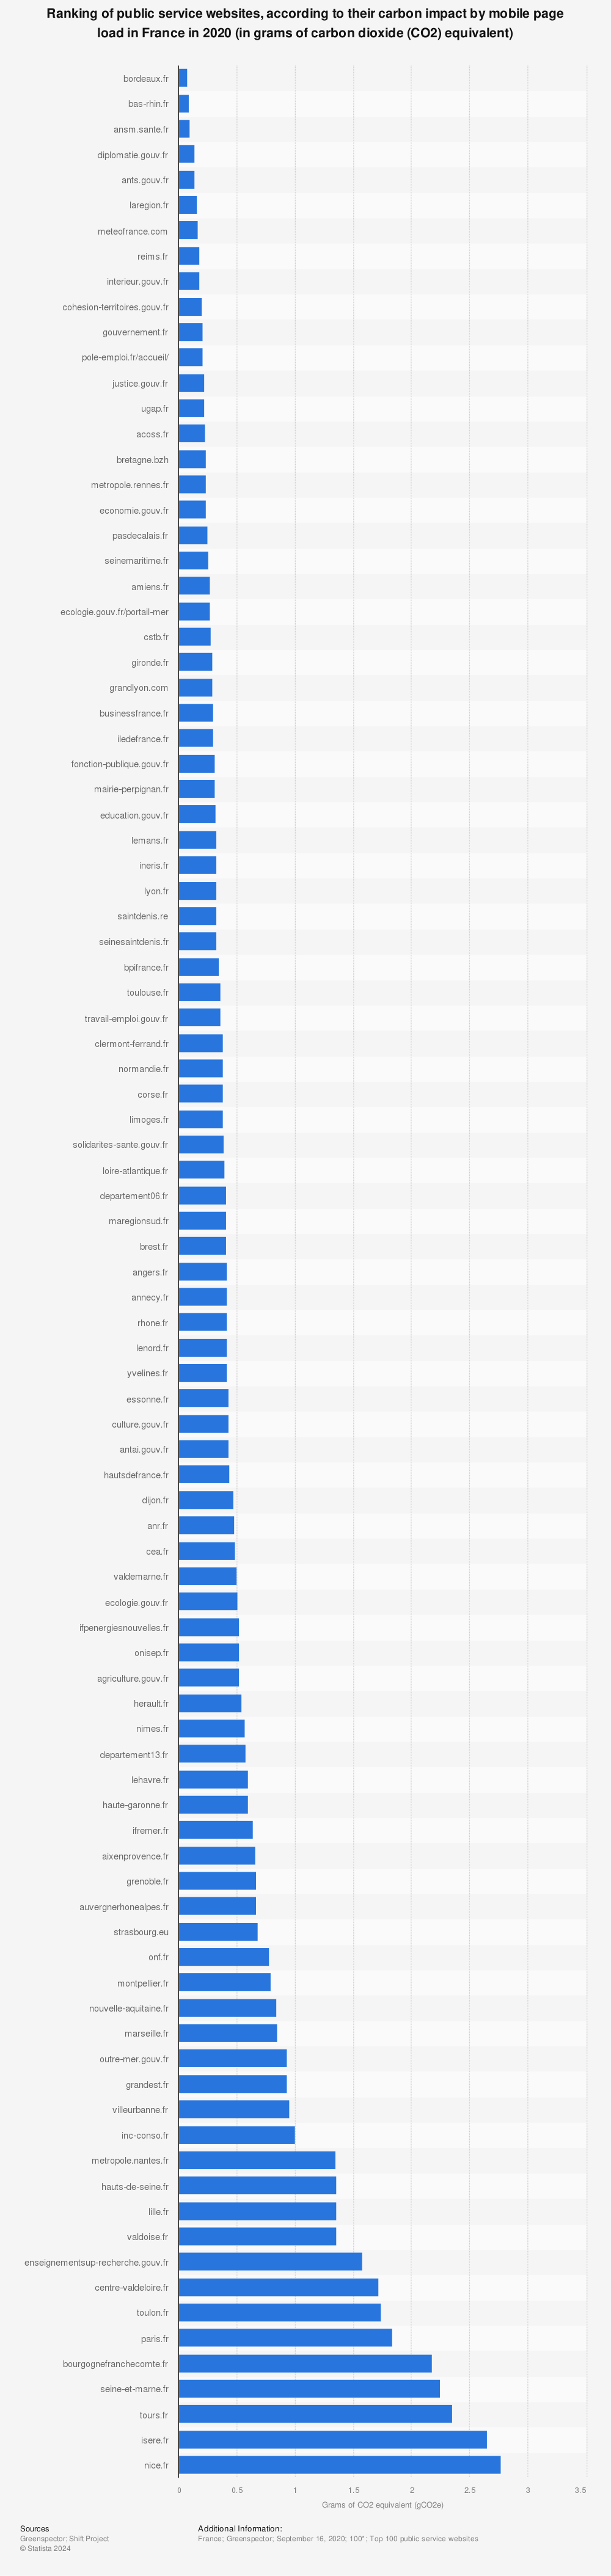 Statistic: Ranking of public service websites, according to their carbon impact by mobile page load in France in 2020 (in grams of carbon dioxide (CO2) equivalent) | Statista